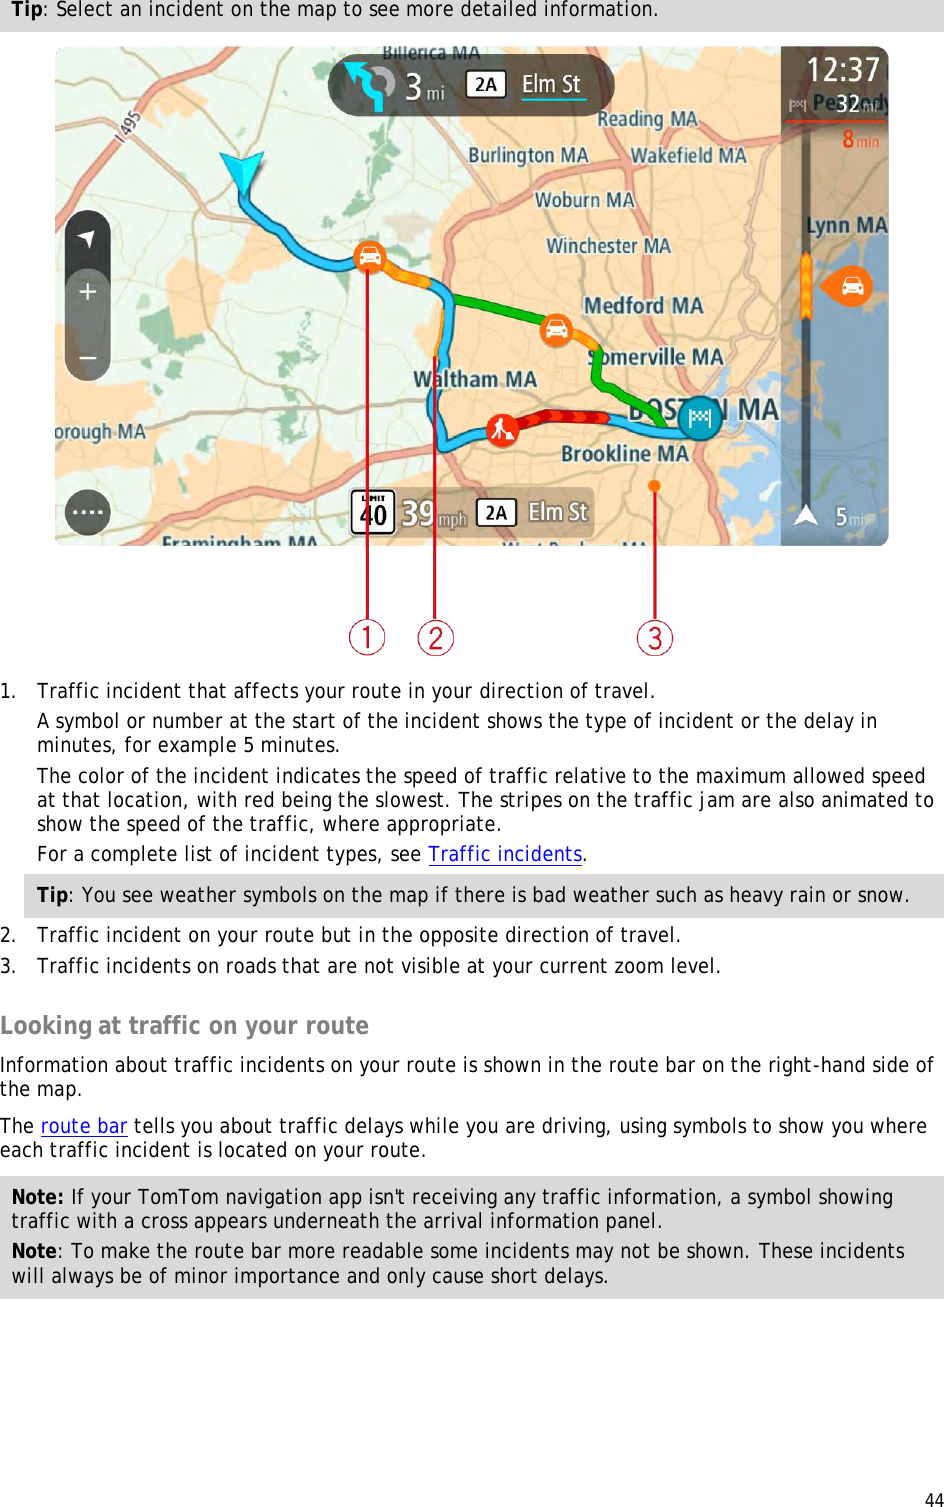  44  Tip: Select an incident on the map to see more detailed information.  1. Traffic incident that affects your route in your direction of travel. A symbol or number at the start of the incident shows the type of incident or the delay in minutes, for example 5 minutes.  The color of the incident indicates the speed of traffic relative to the maximum allowed speed at that location, with red being the slowest. The stripes on the traffic jam are also animated to show the speed of the traffic, where appropriate.  For a complete list of incident types, see Traffic incidents. Tip: You see weather symbols on the map if there is bad weather such as heavy rain or snow. 2. Traffic incident on your route but in the opposite direction of travel. 3. Traffic incidents on roads that are not visible at your current zoom level.  Looking at traffic on your route Information about traffic incidents on your route is shown in the route bar on the right-hand side of the map. The route bar tells you about traffic delays while you are driving, using symbols to show you where each traffic incident is located on your route. Note: If your TomTom navigation app isn&apos;t receiving any traffic information, a symbol showing traffic with a cross appears underneath the arrival information panel. Note: To make the route bar more readable some incidents may not be shown. These incidents will always be of minor importance and only cause short delays. 